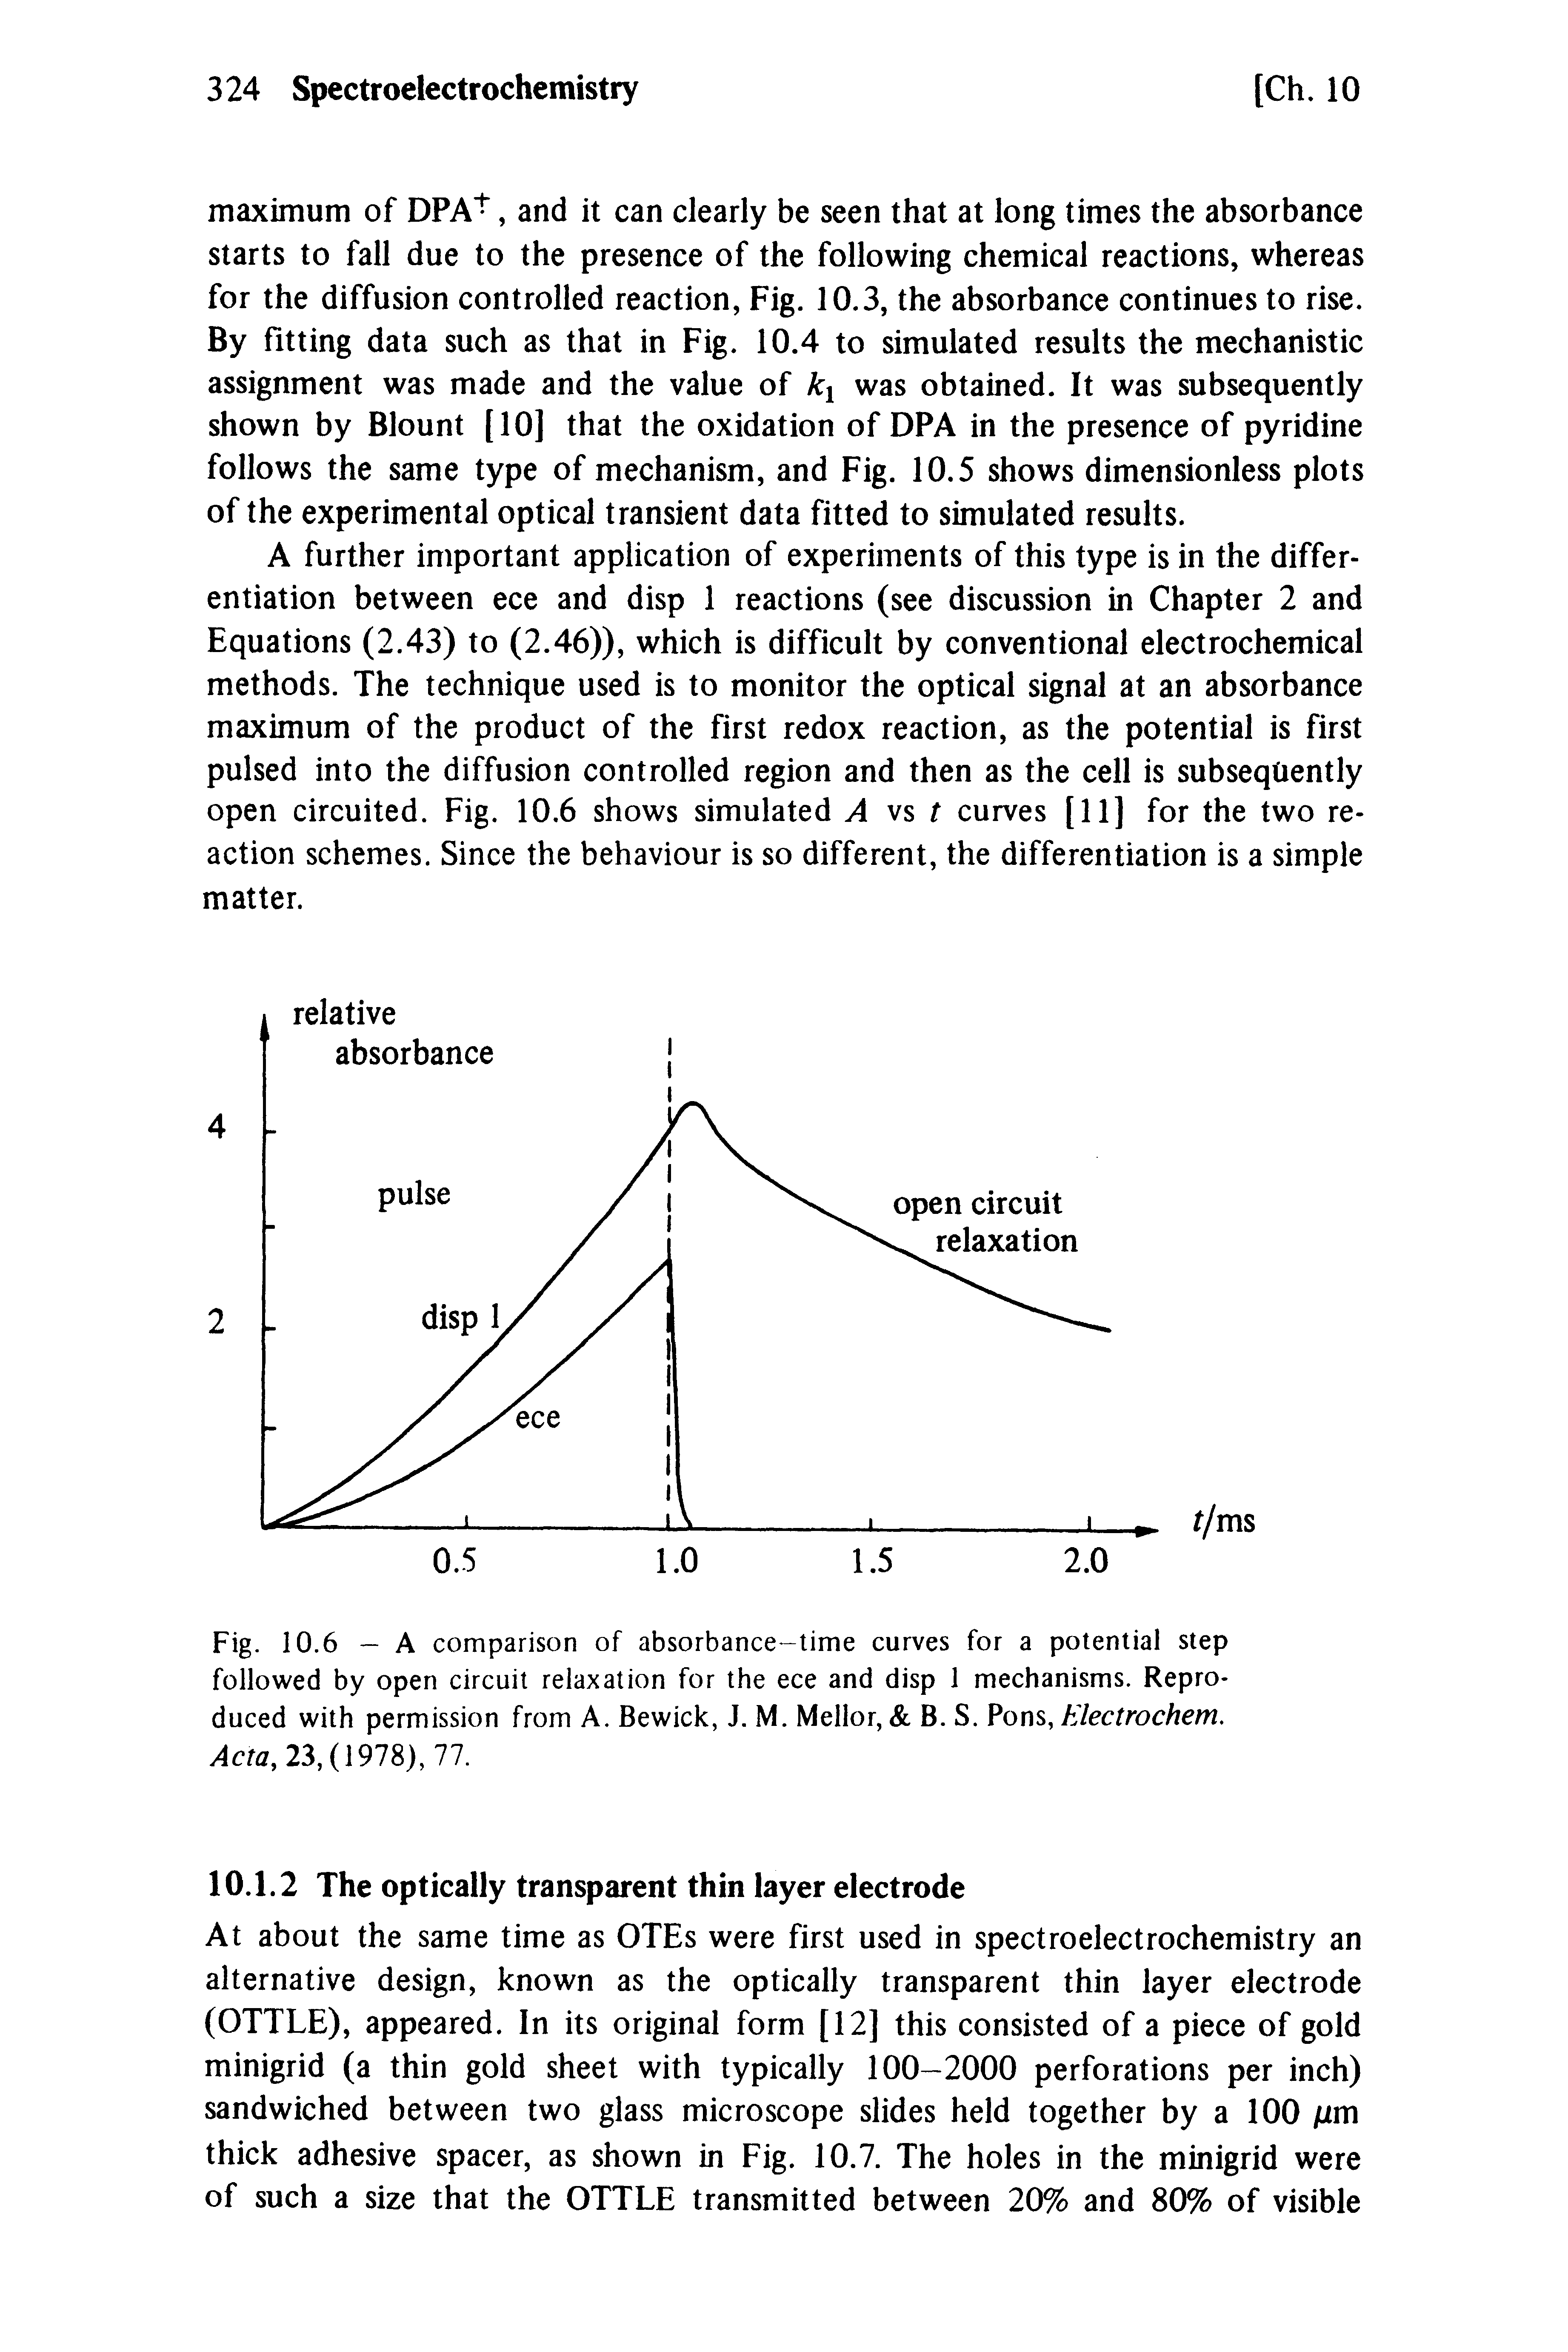 Fig. 10.6 — A comparison of absorbance-time curves for a potential step followed by open circuit relaxation for the ece and disp 1 mechanisms. Reproduced with permission from A. Bewick, J. M. Mellor, B. S. Pons, Hlectrochem. Acta, 23, (1978), 77.